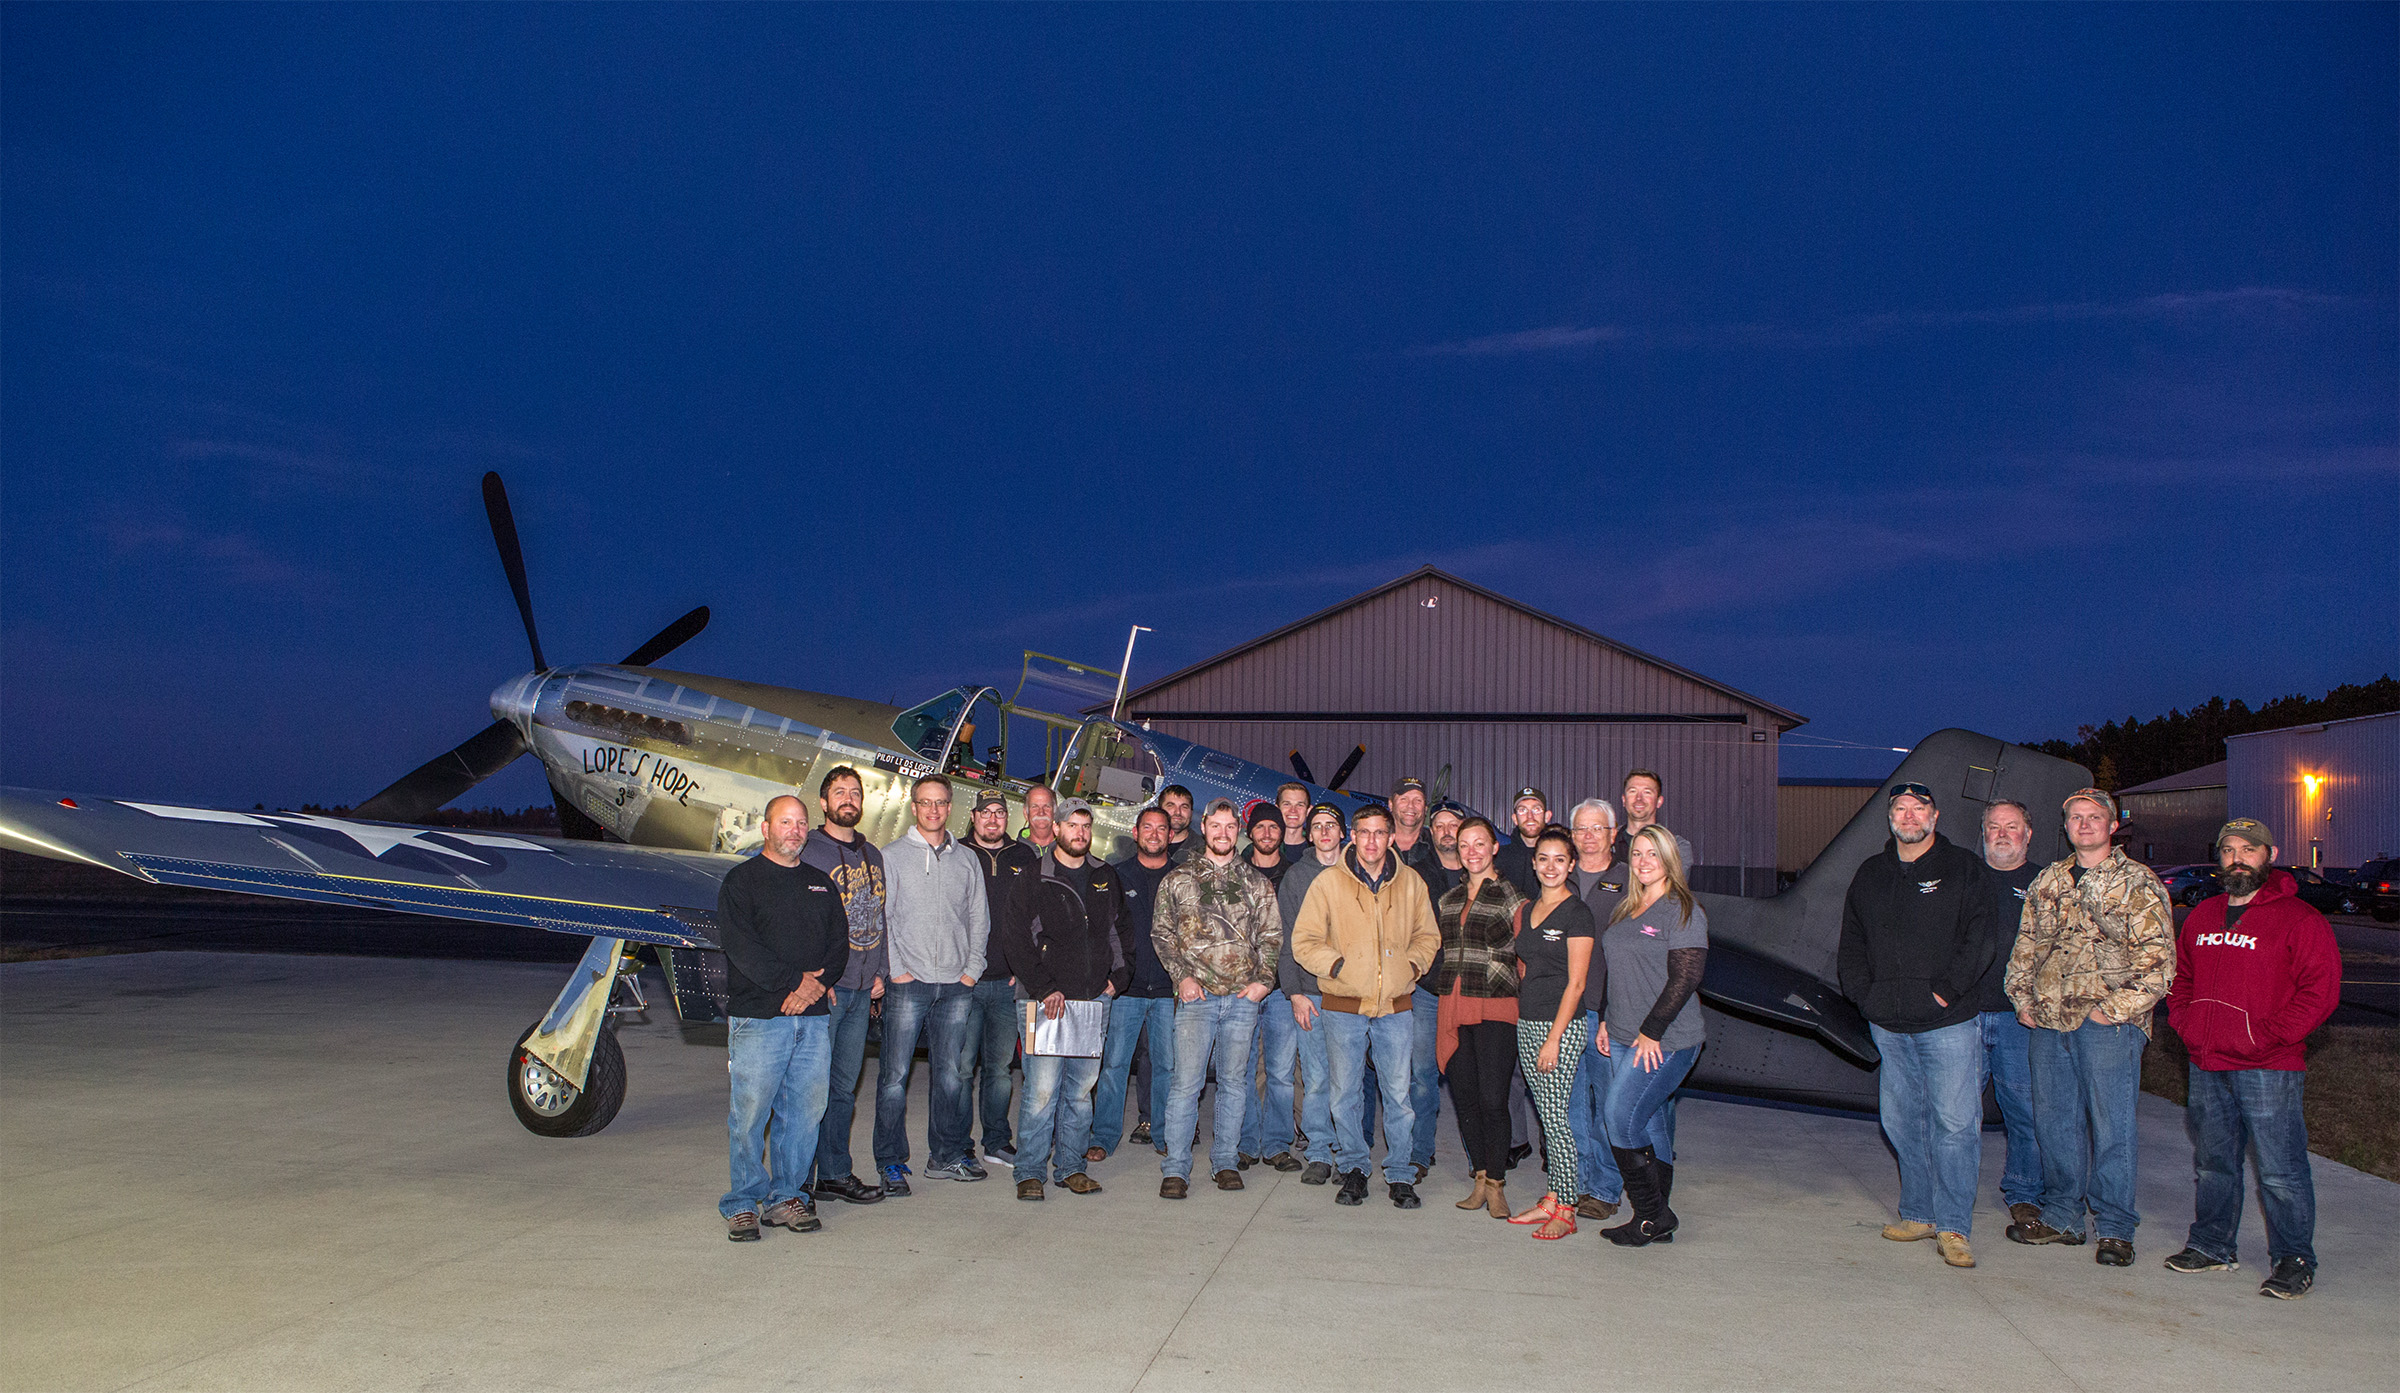 A very pleased AirCorps Aviation crew poses in front of Lope’s Hope 3rd after a squawk-free test flight. (photo by John LaTourelle via AirCorps Aviation)